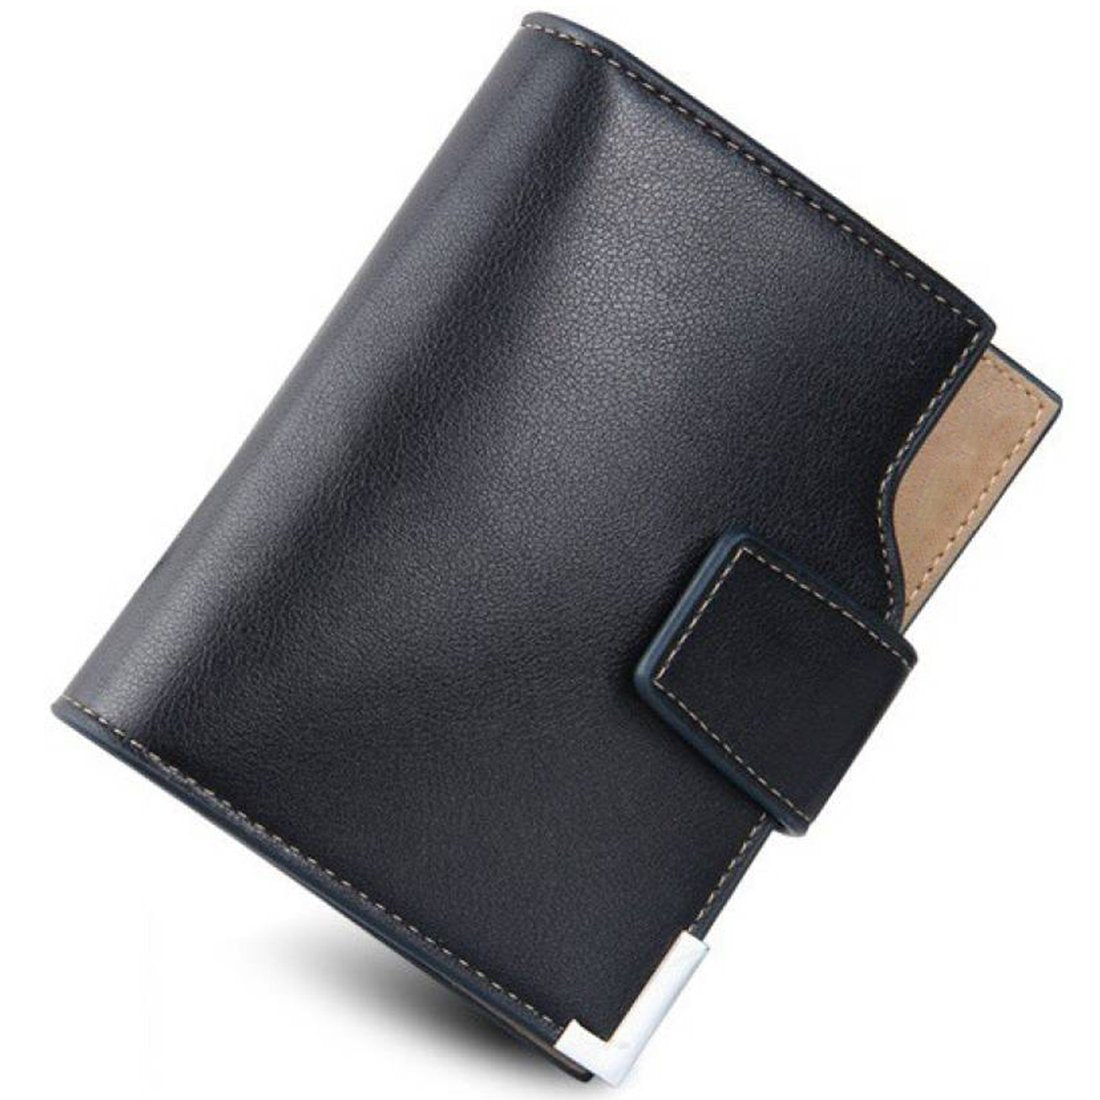 PU Leather Bifold Wallet Debit, Credit Card Money Holder for with 13 Card Slots (Black)